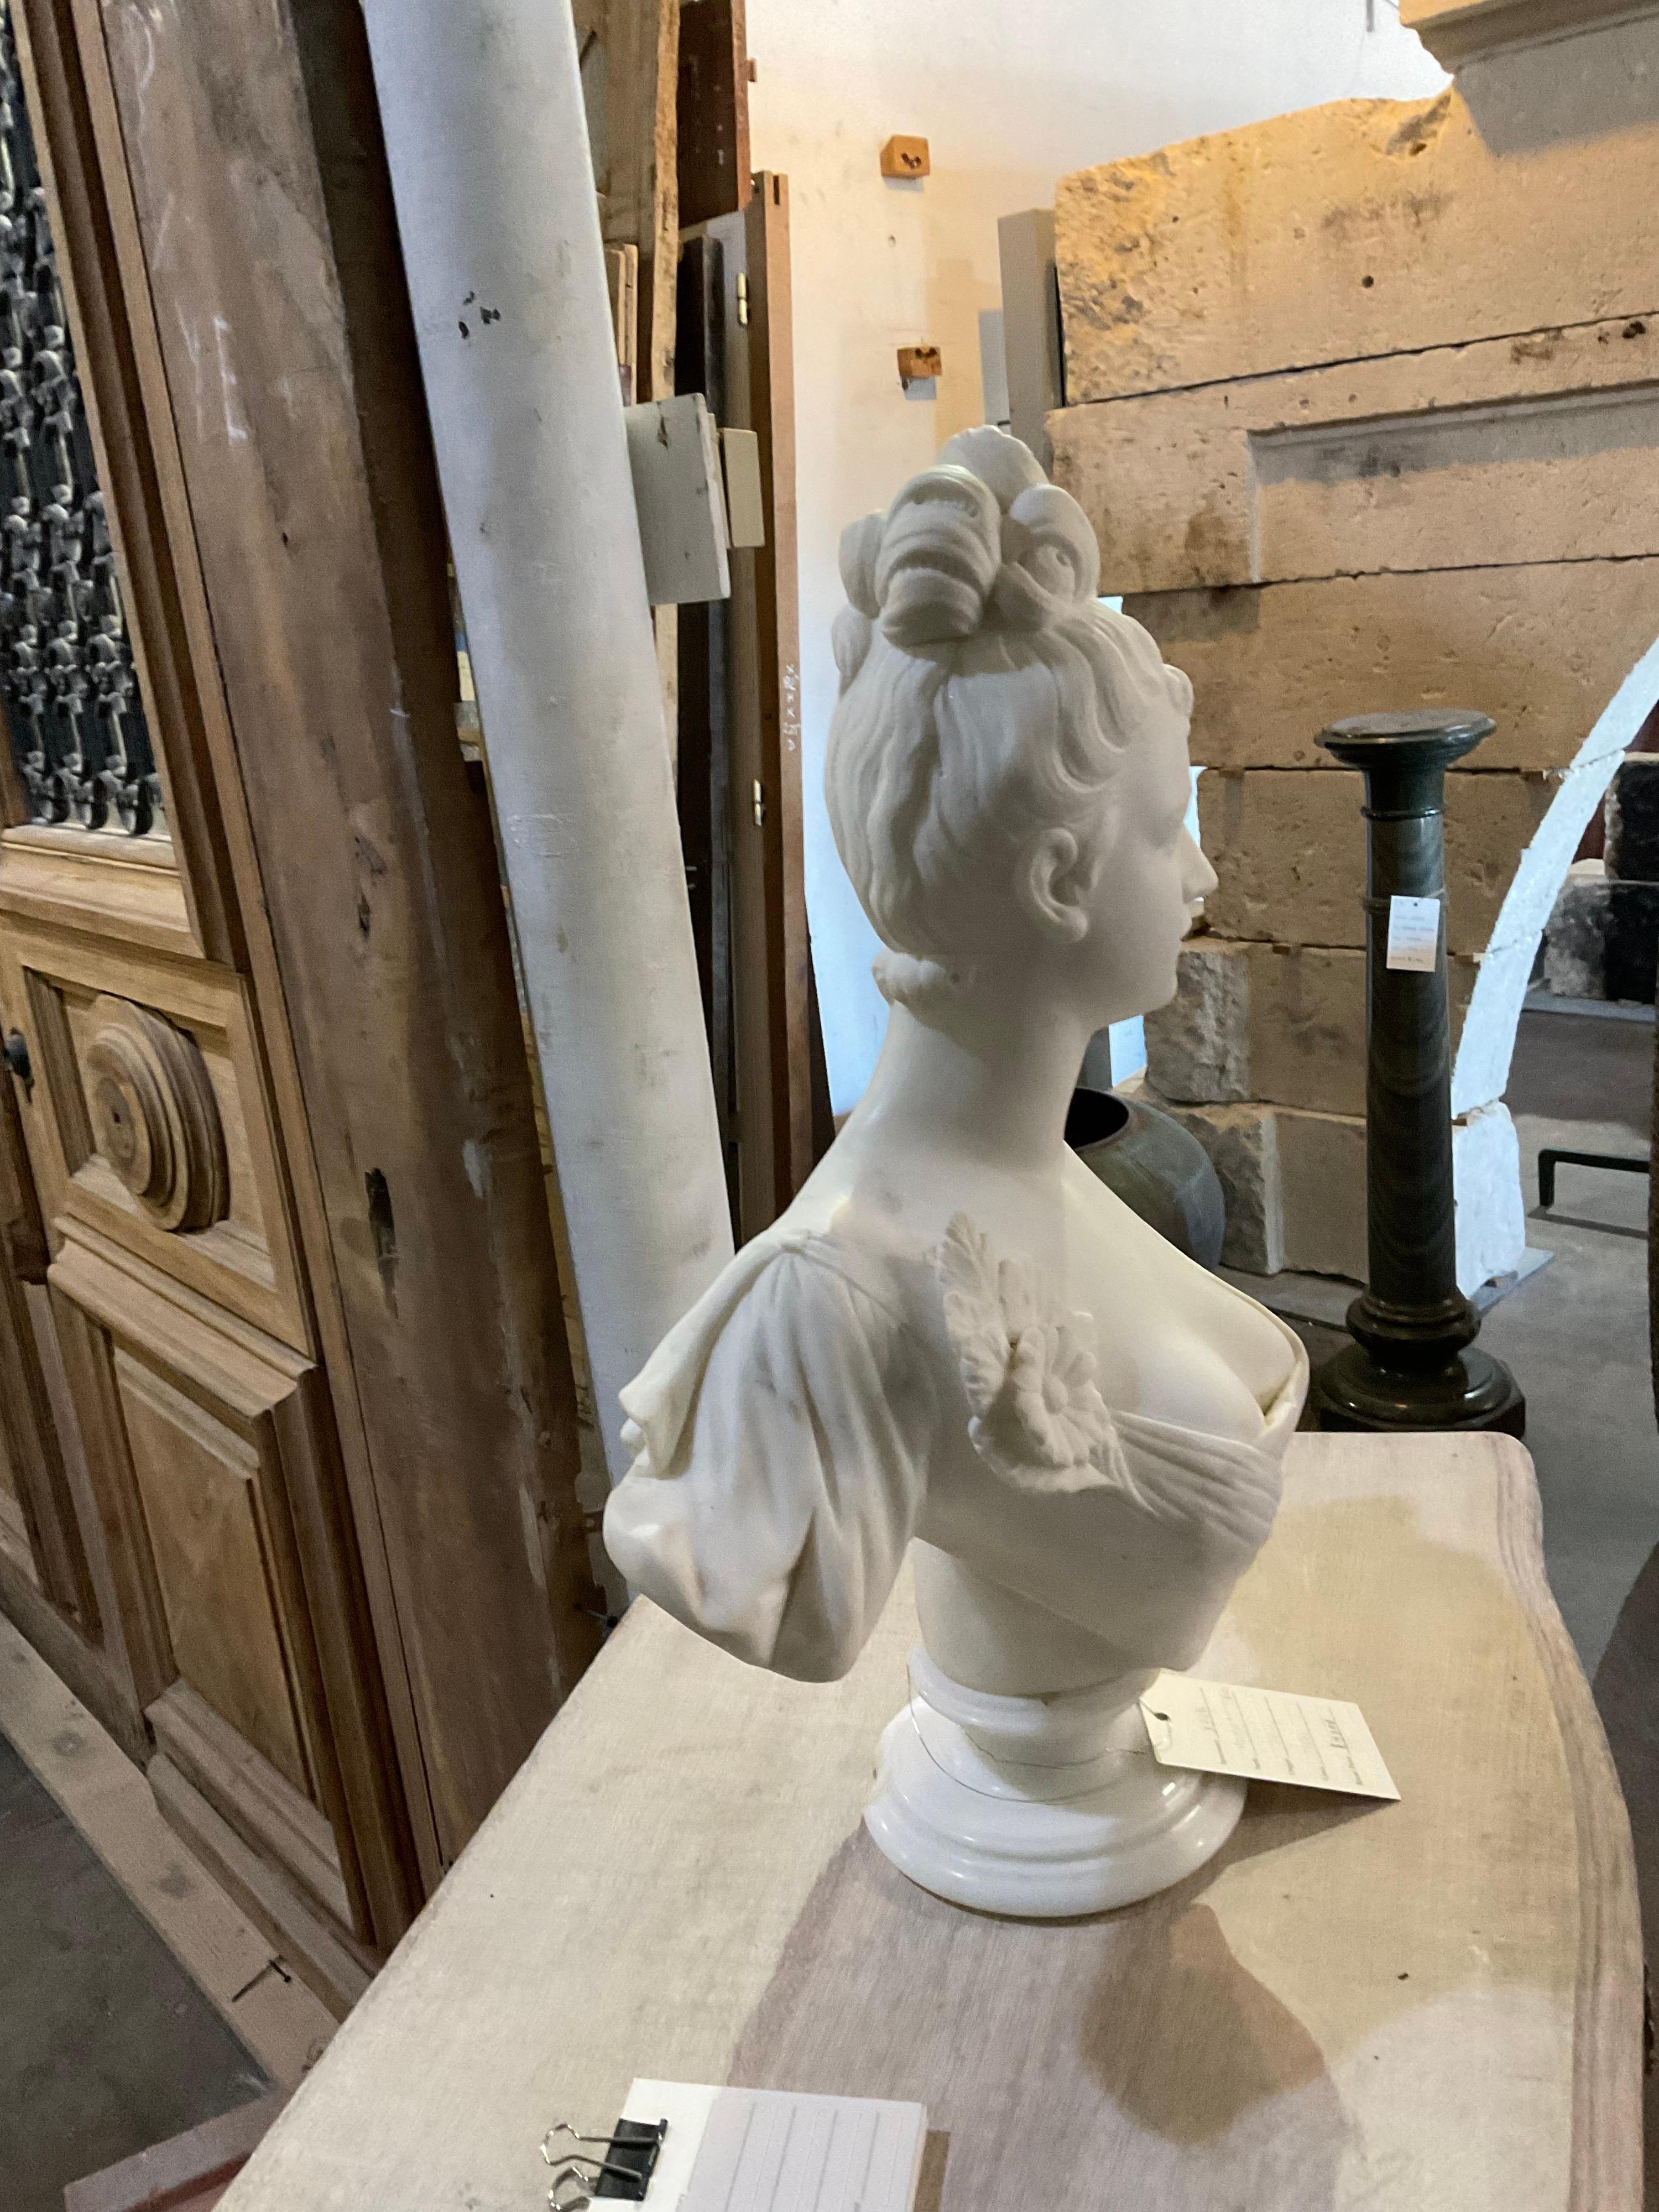 Desirable marble bust from 1850s Italy.